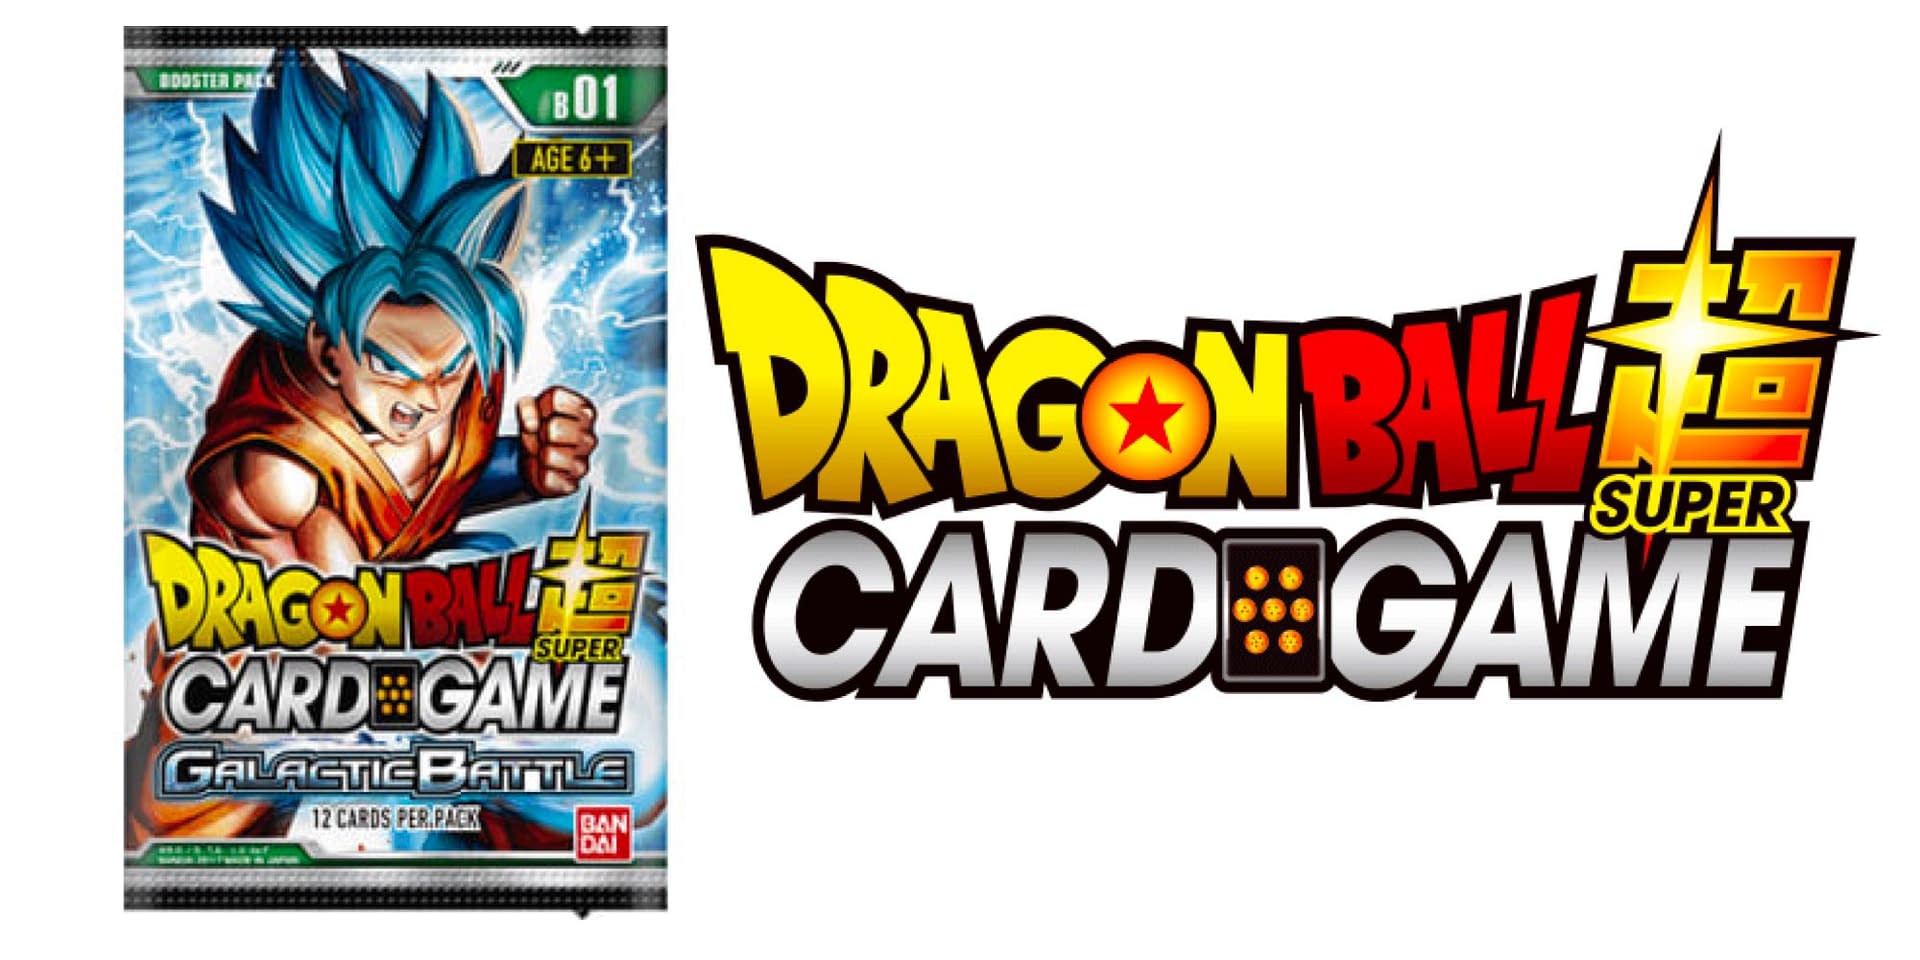 Dragon Ball Rage Codes for December 2023